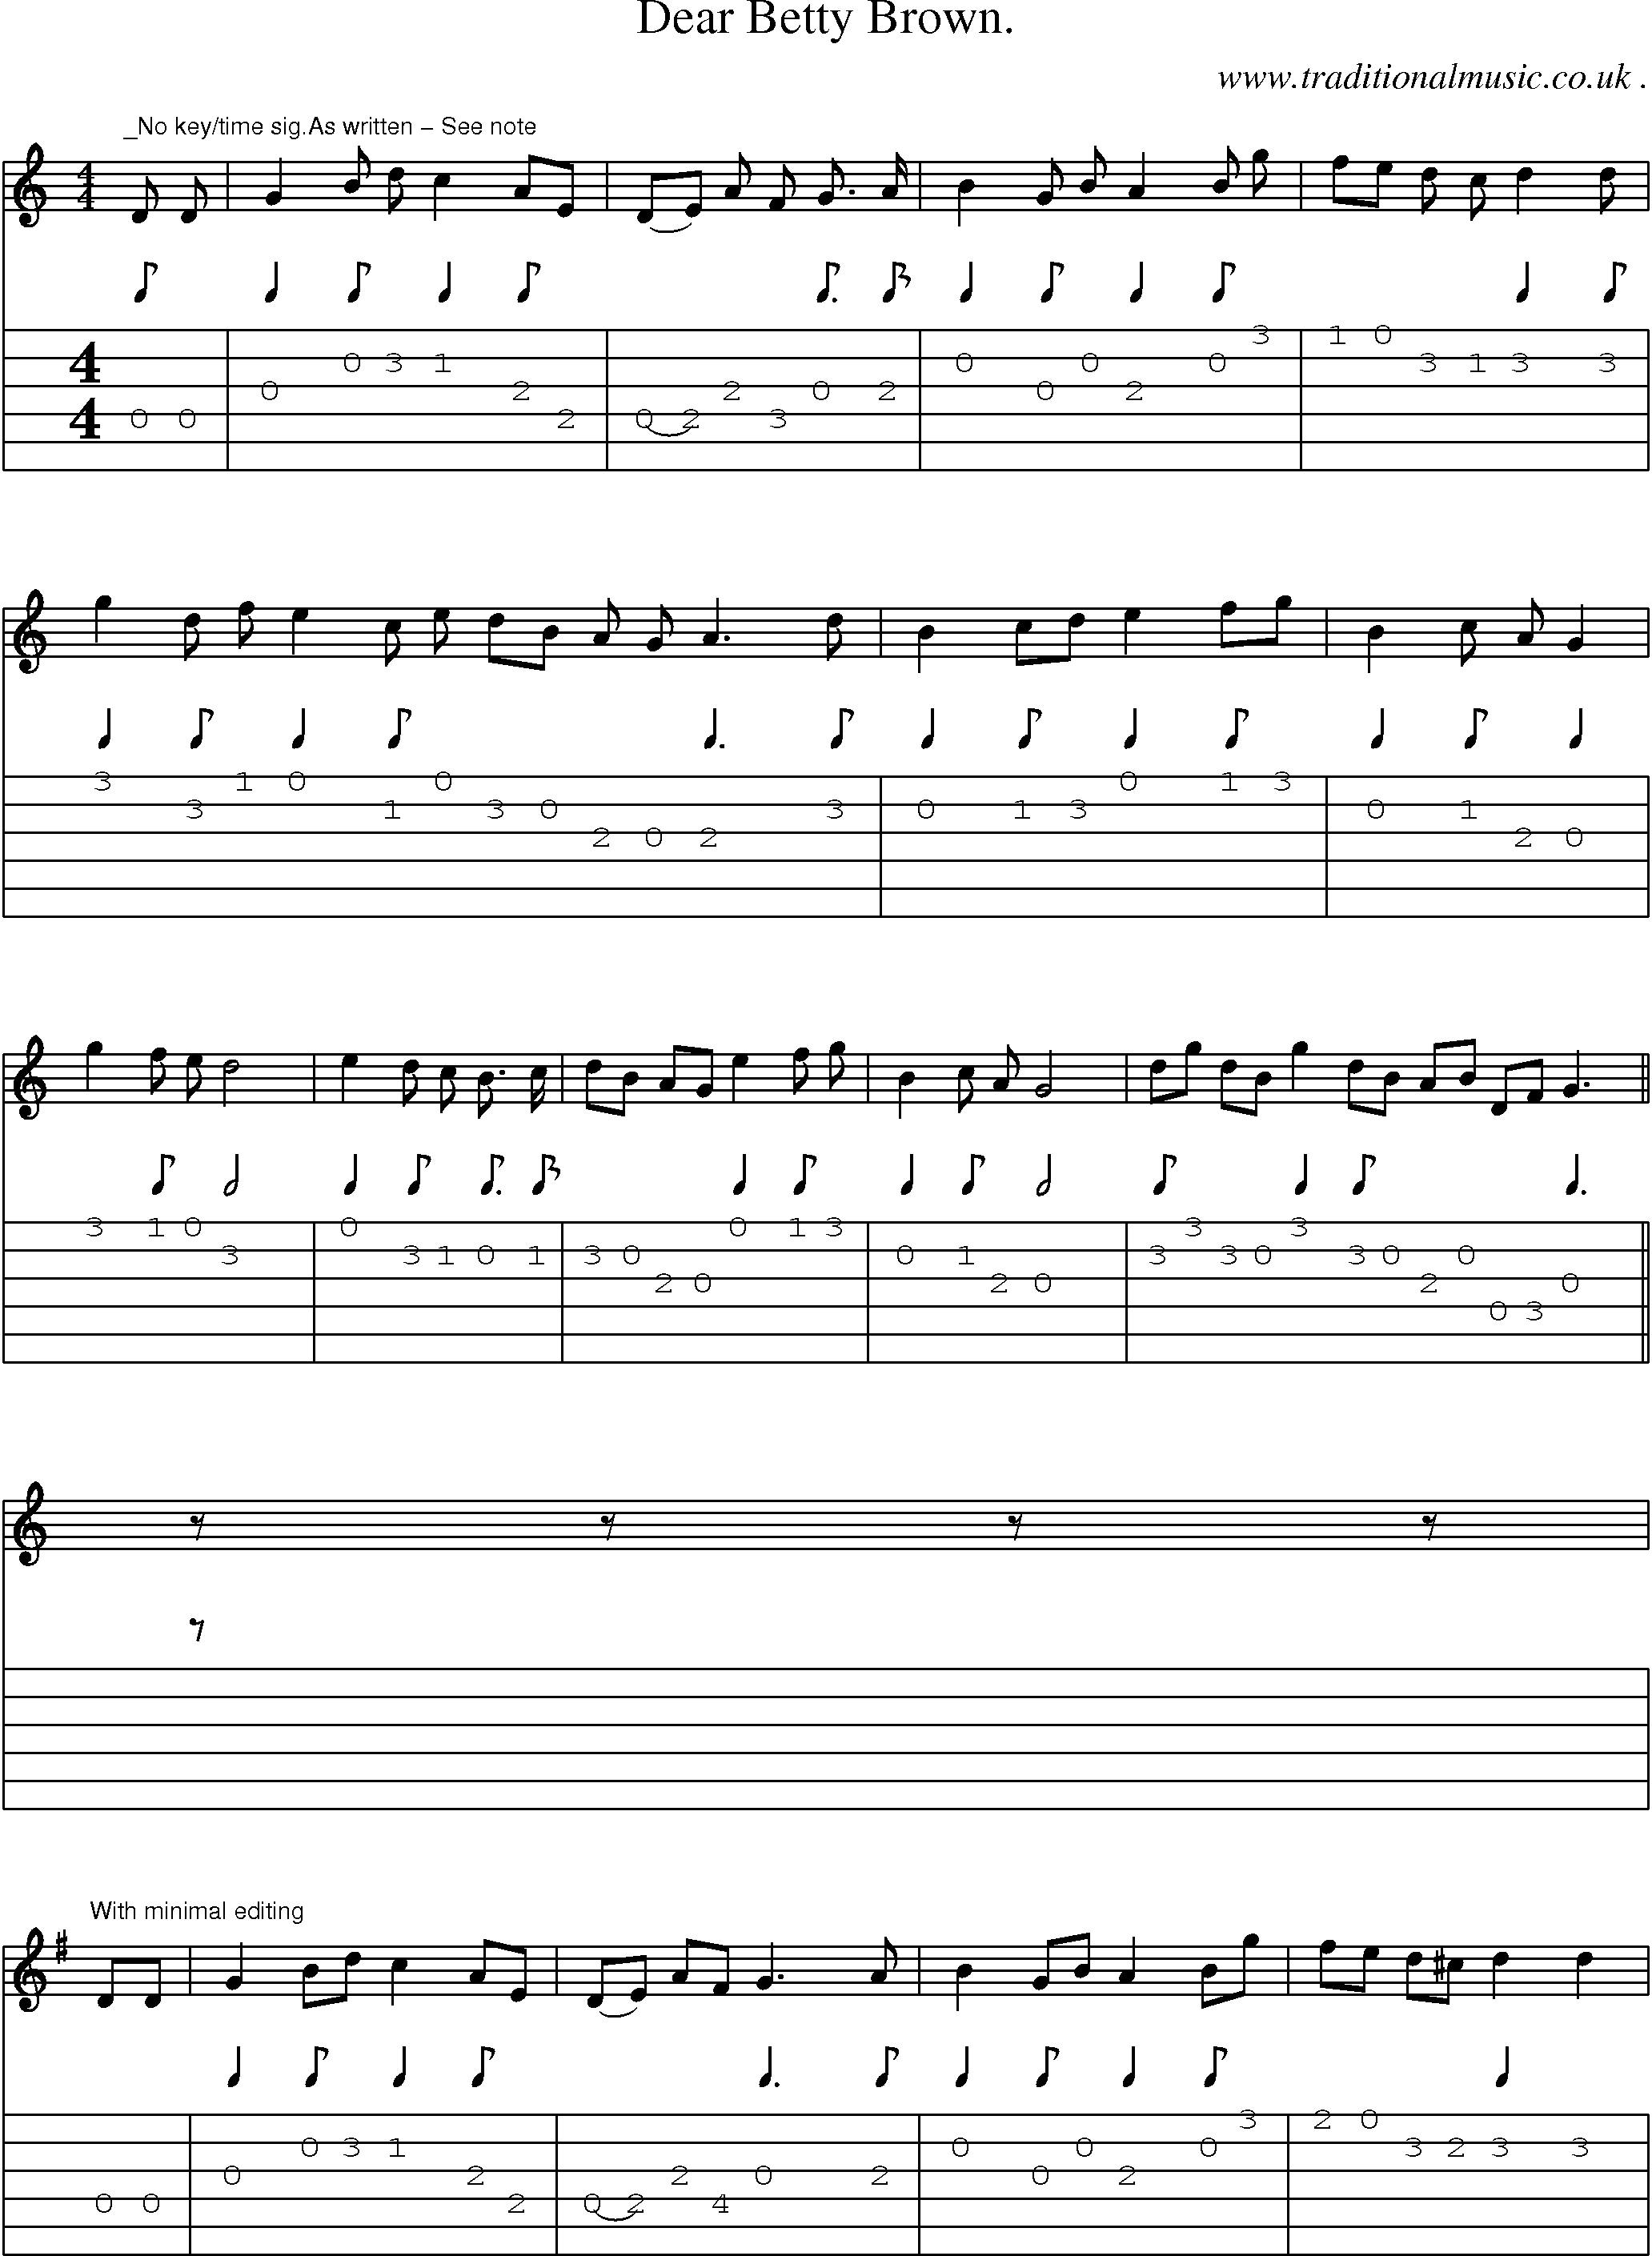 Sheet-Music and Guitar Tabs for Dear Betty Brown